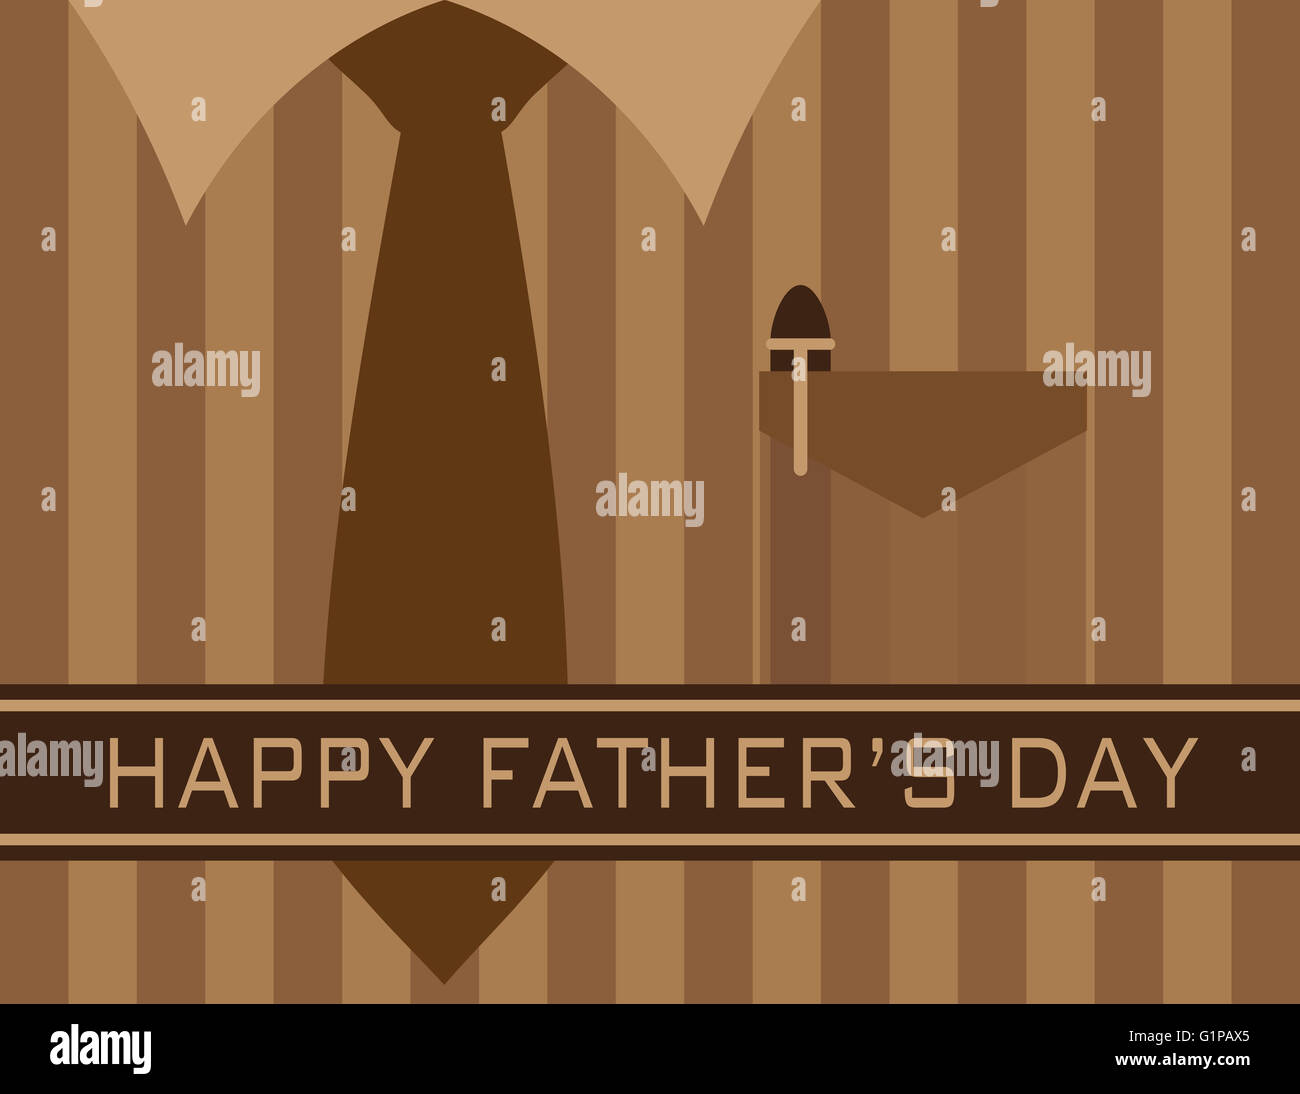 Happy Father's Day Text with Tie Shirt Pocket Pen on Brown Stripes Pattern Background Illustration Stock Photo